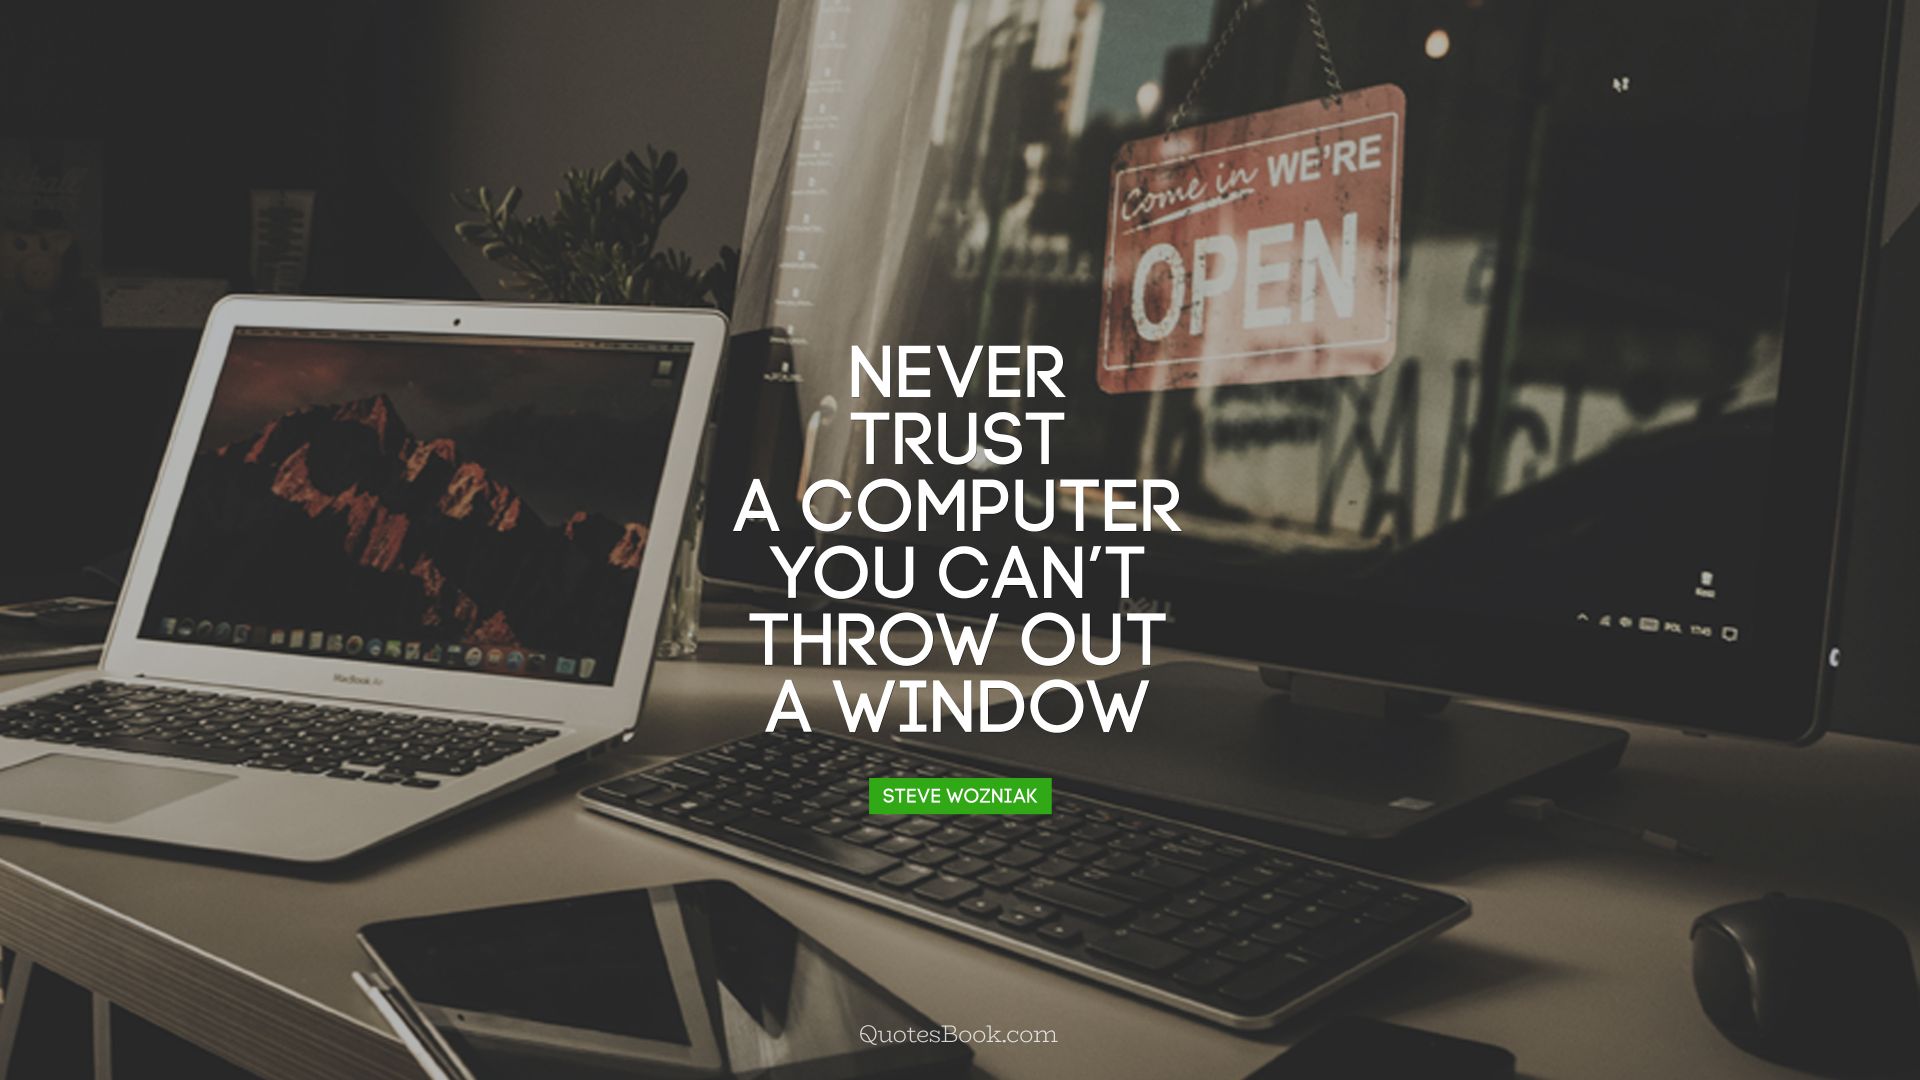 Never trust a computer you can’t throw out a window. - Quote by Steve Wozniak